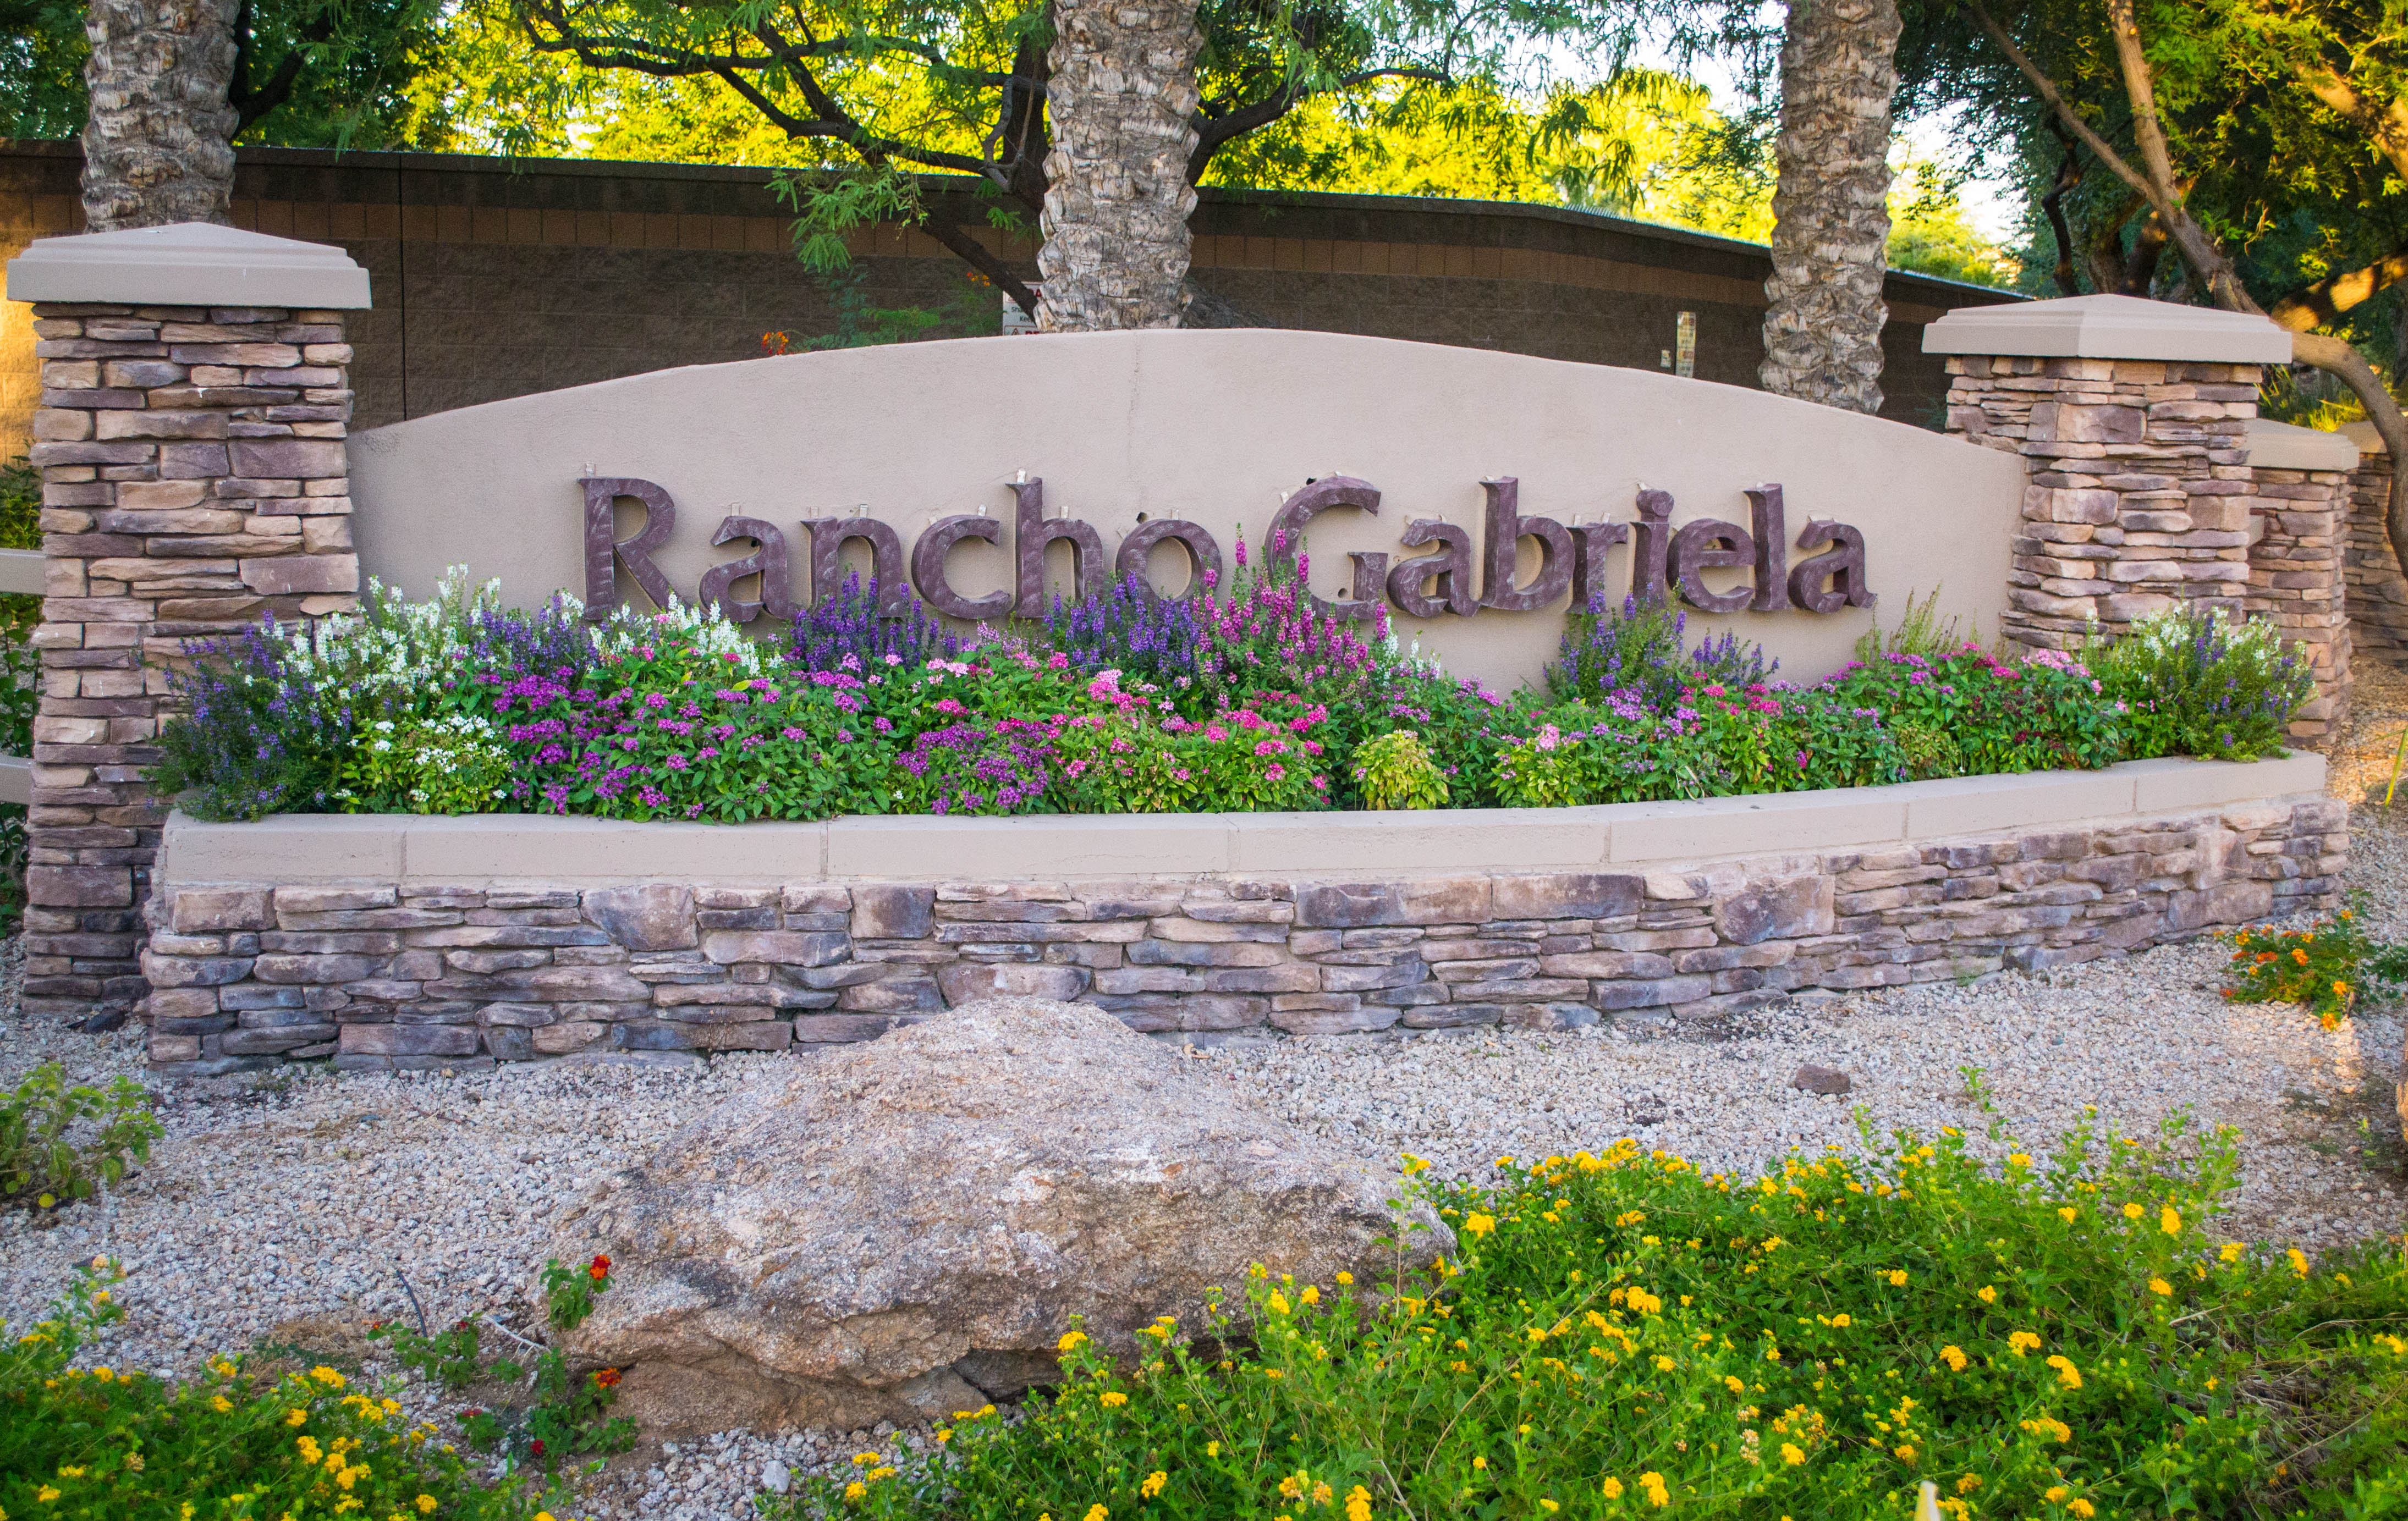 <!DOCTYPE html> <html> <head> <style> p {text-align:center;} </style></head><body><p>Rancho Gabriela